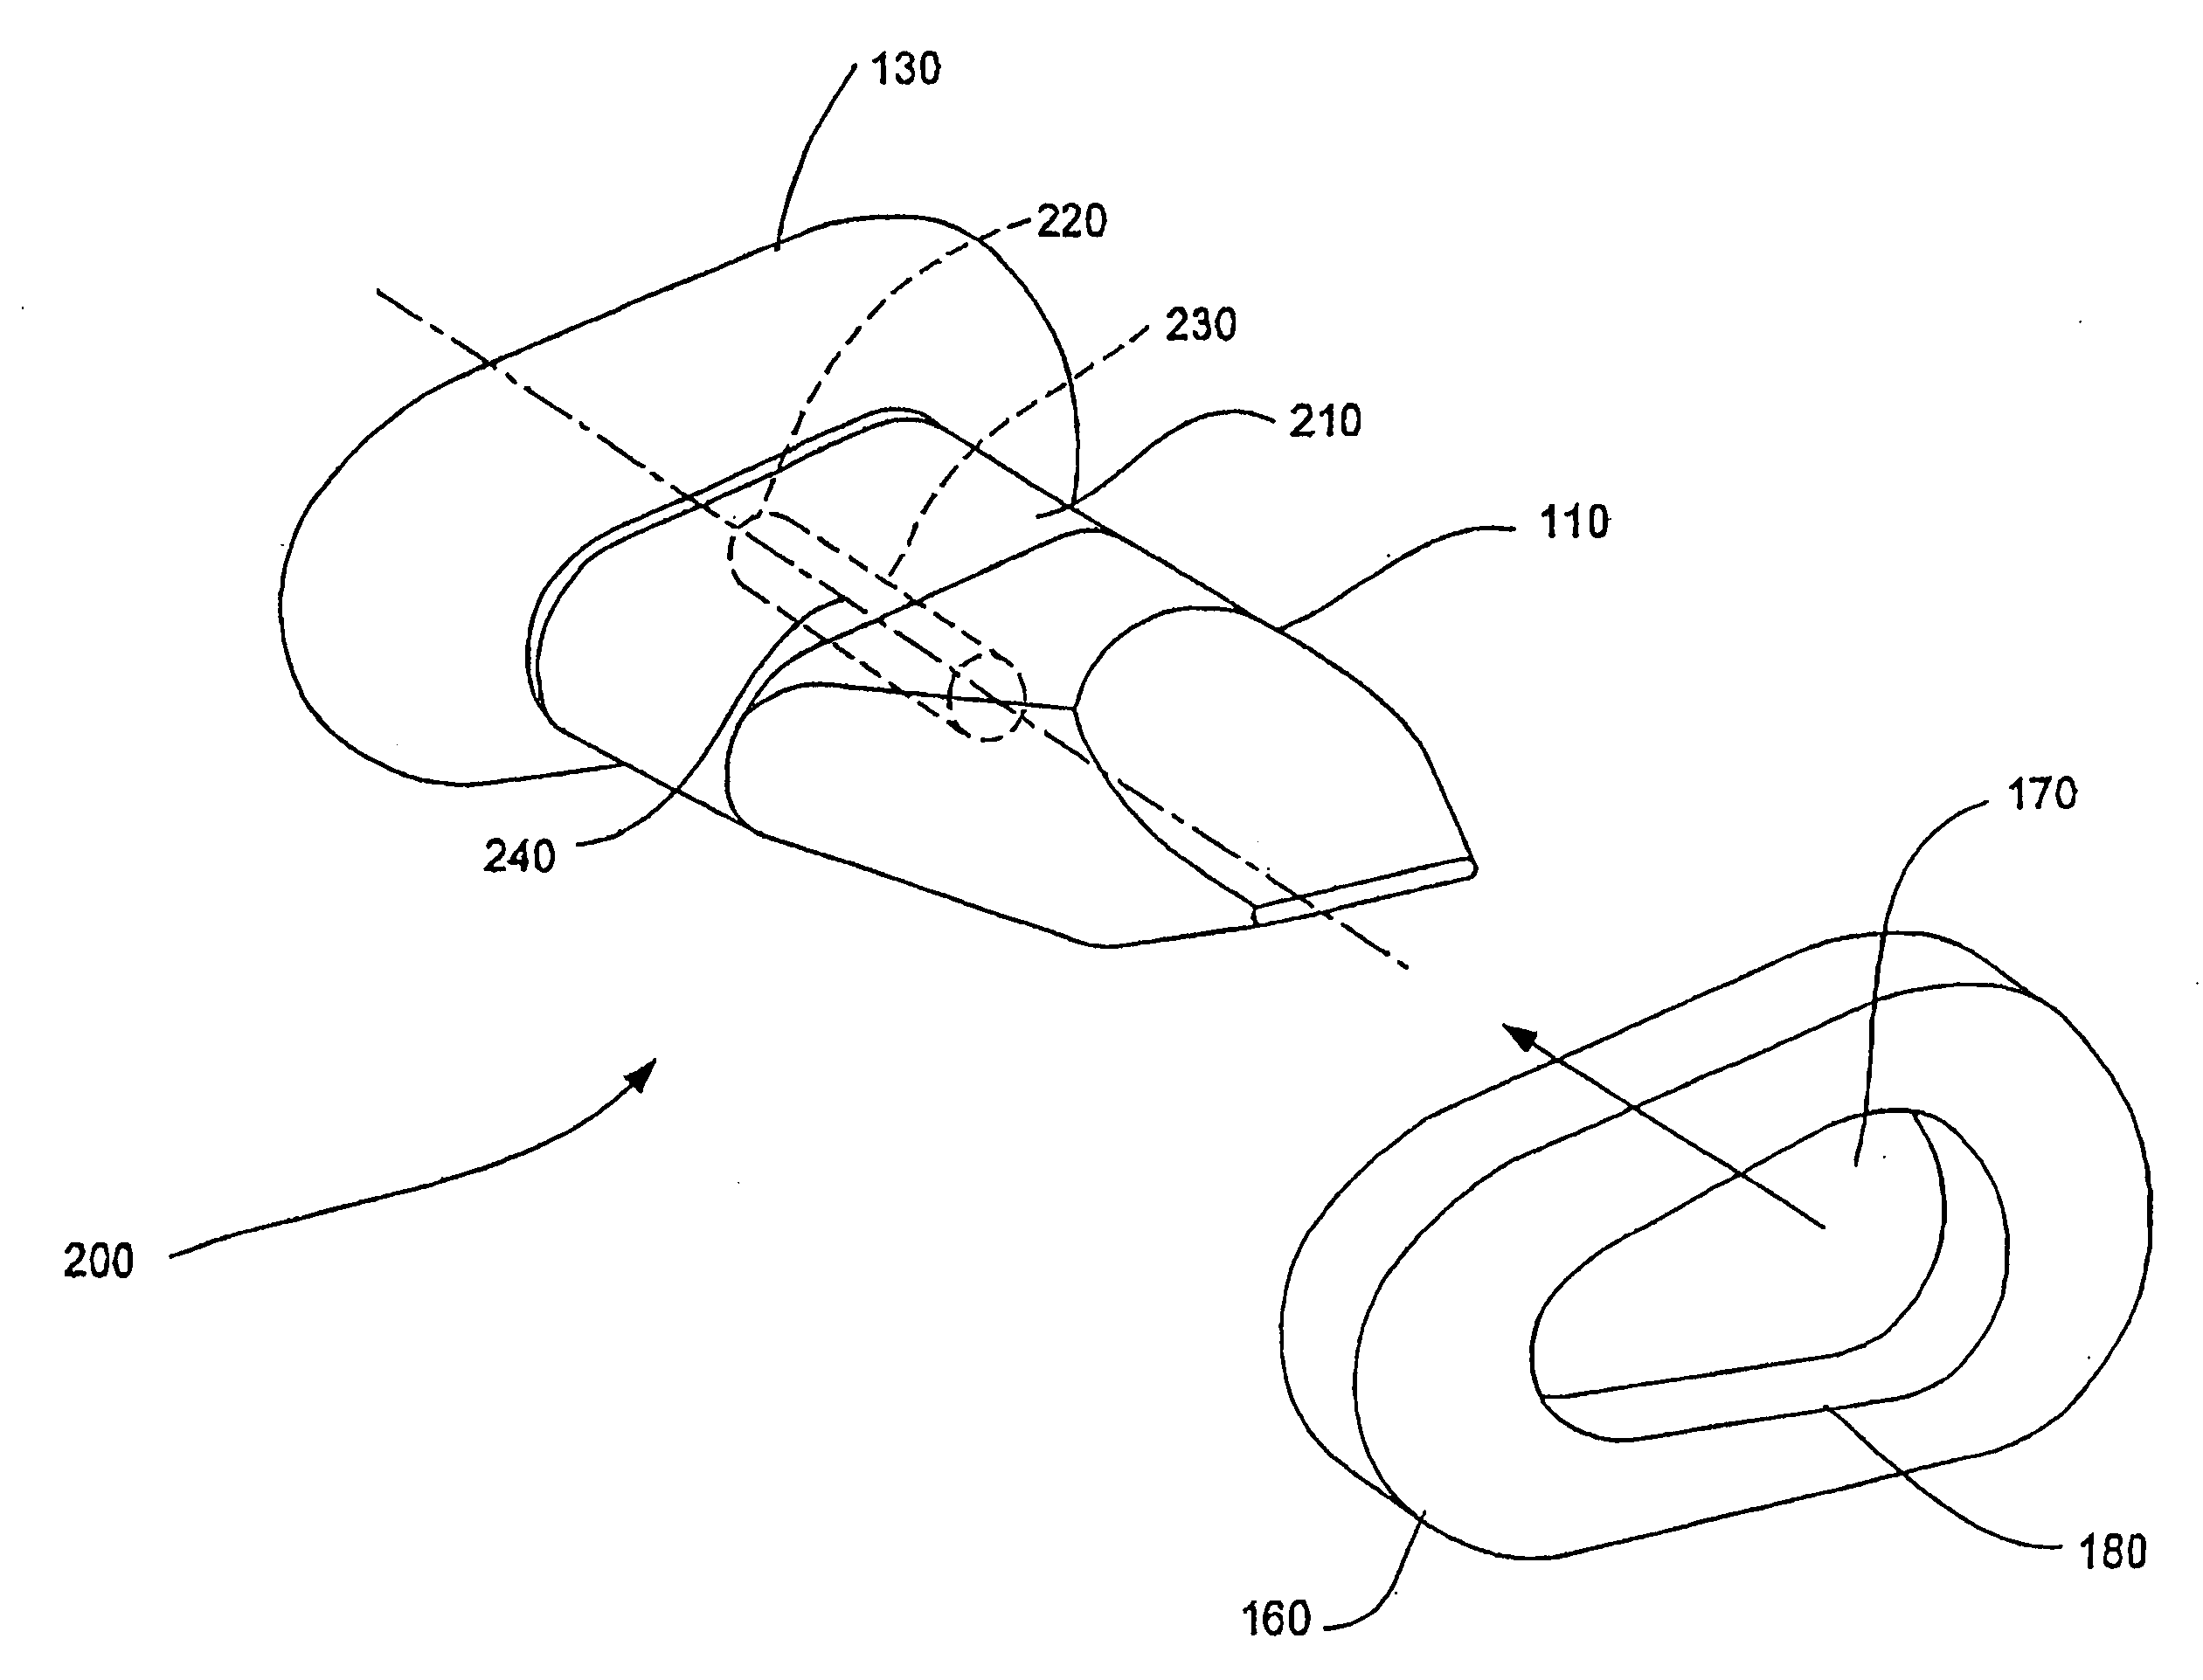 Cervical interspinous process distraction implant and method of implantation